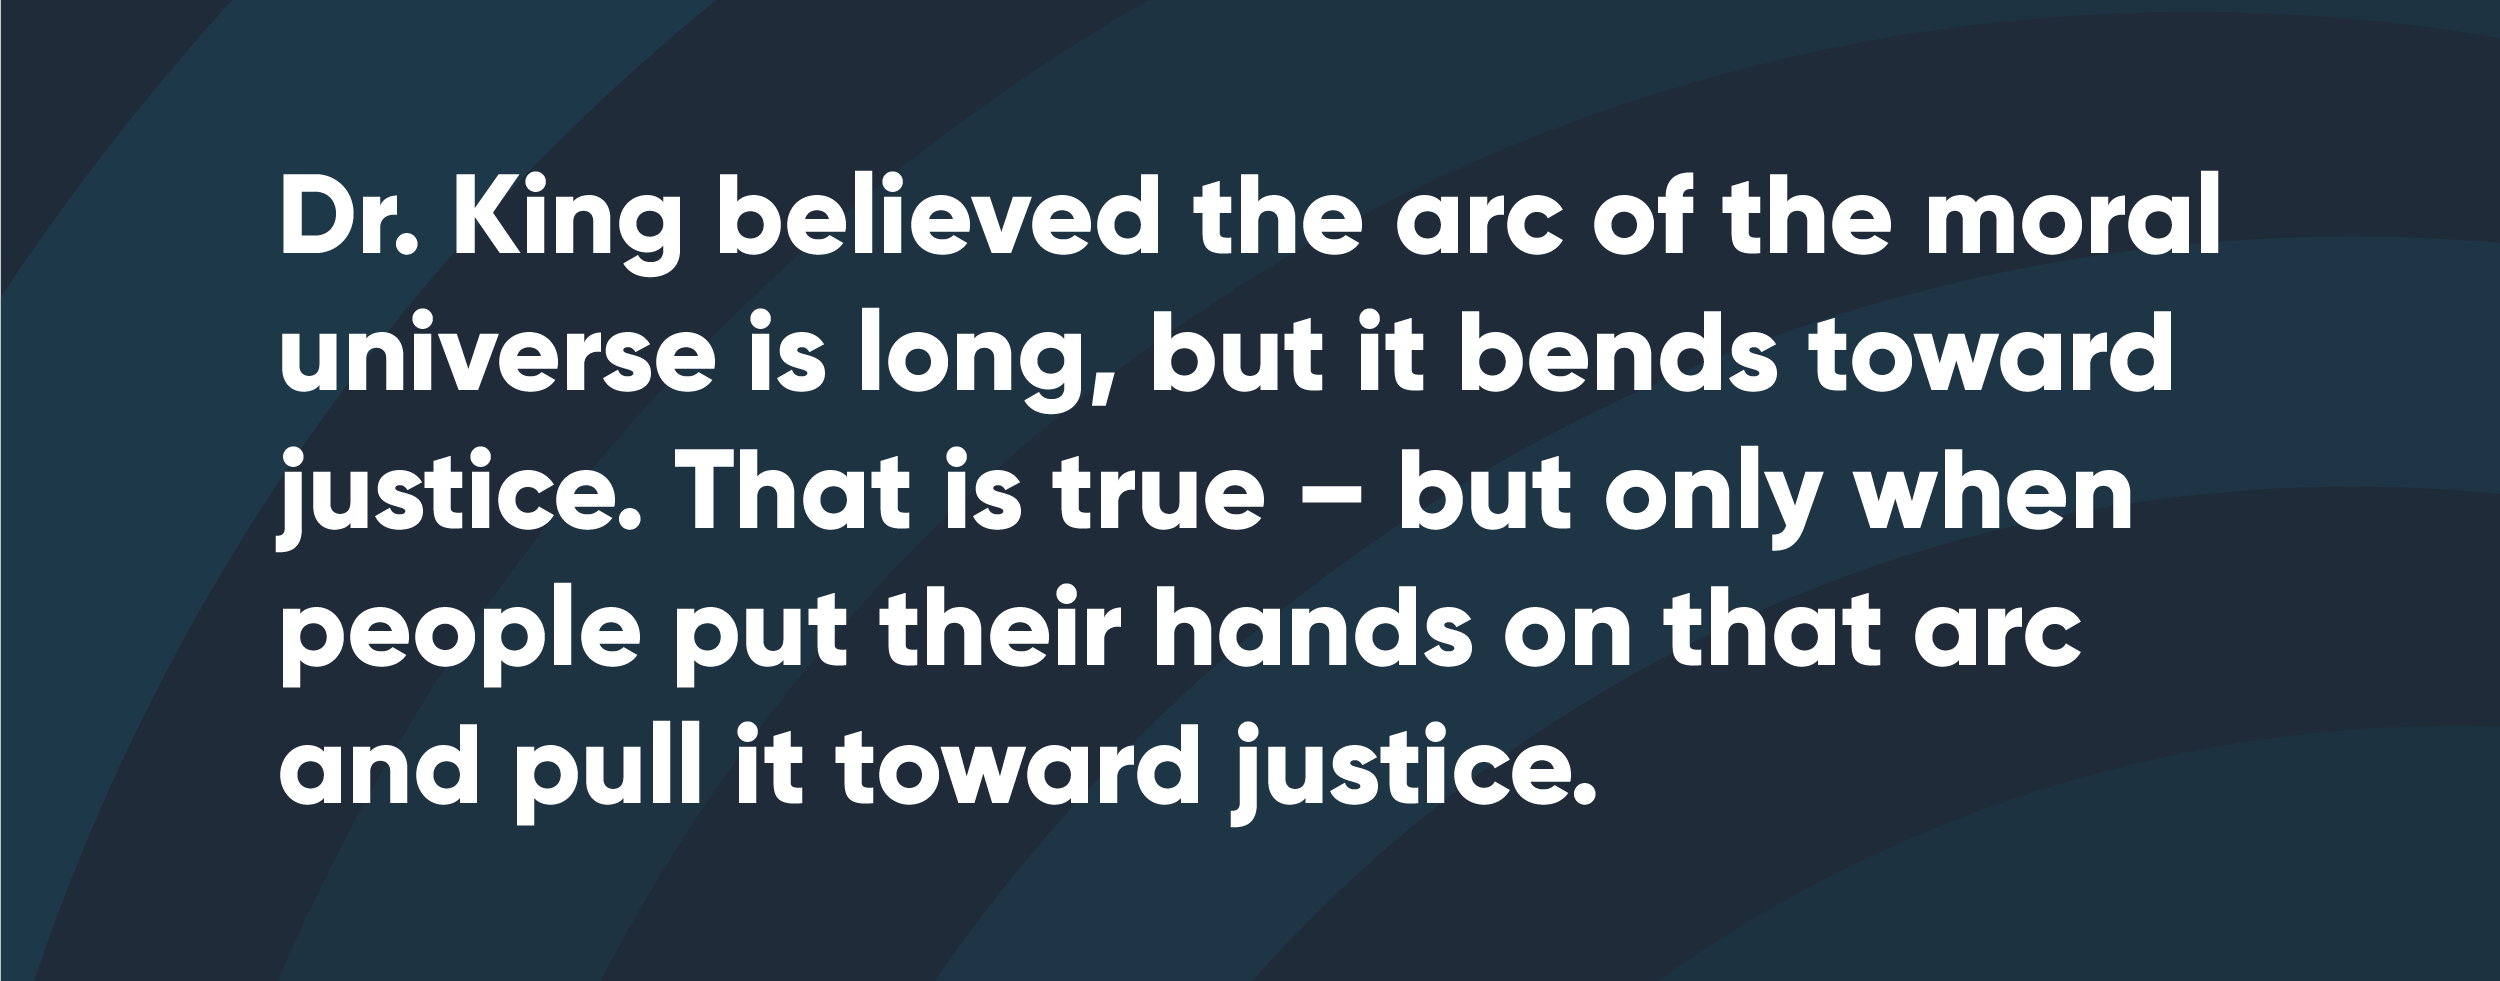 Dr. King believed the arc of the moral universe is long, but it bends towards justice. That is true -- but only when people put their hands on that arc and pull it toward justice.